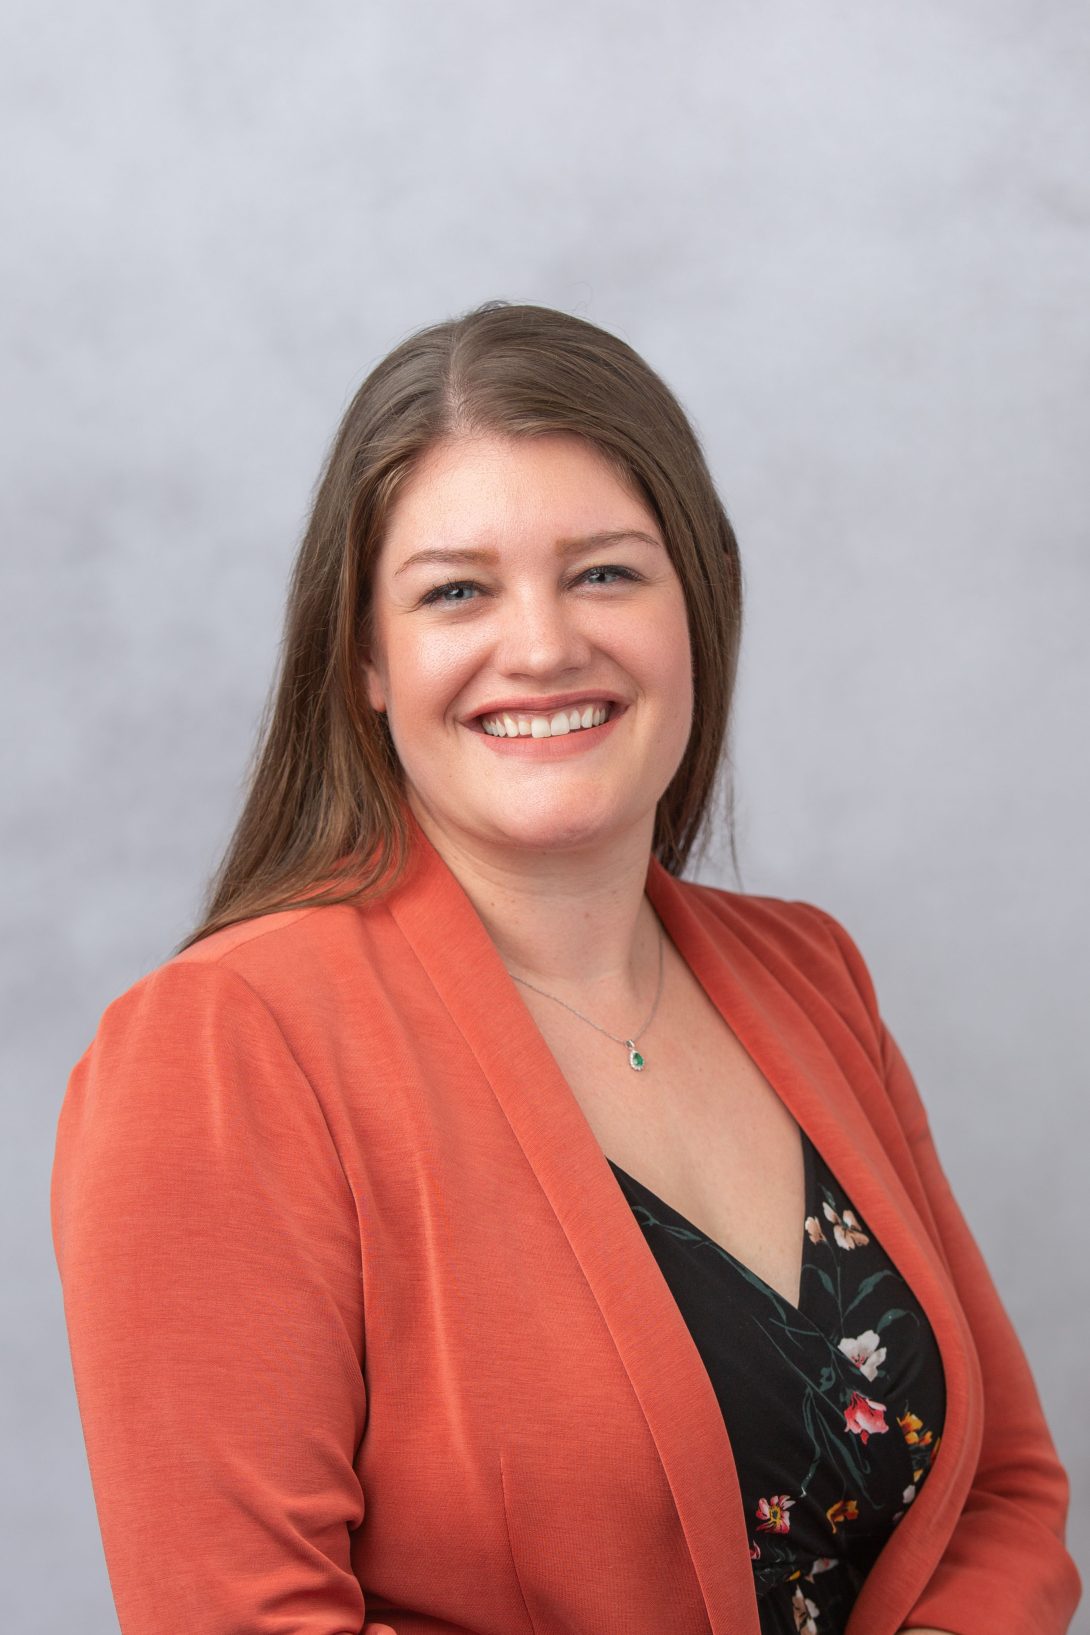 Headshot of Postdoc Office Director Valerie Miller, who is wearing an orange blazer and black floral jumpsuit against a gray background